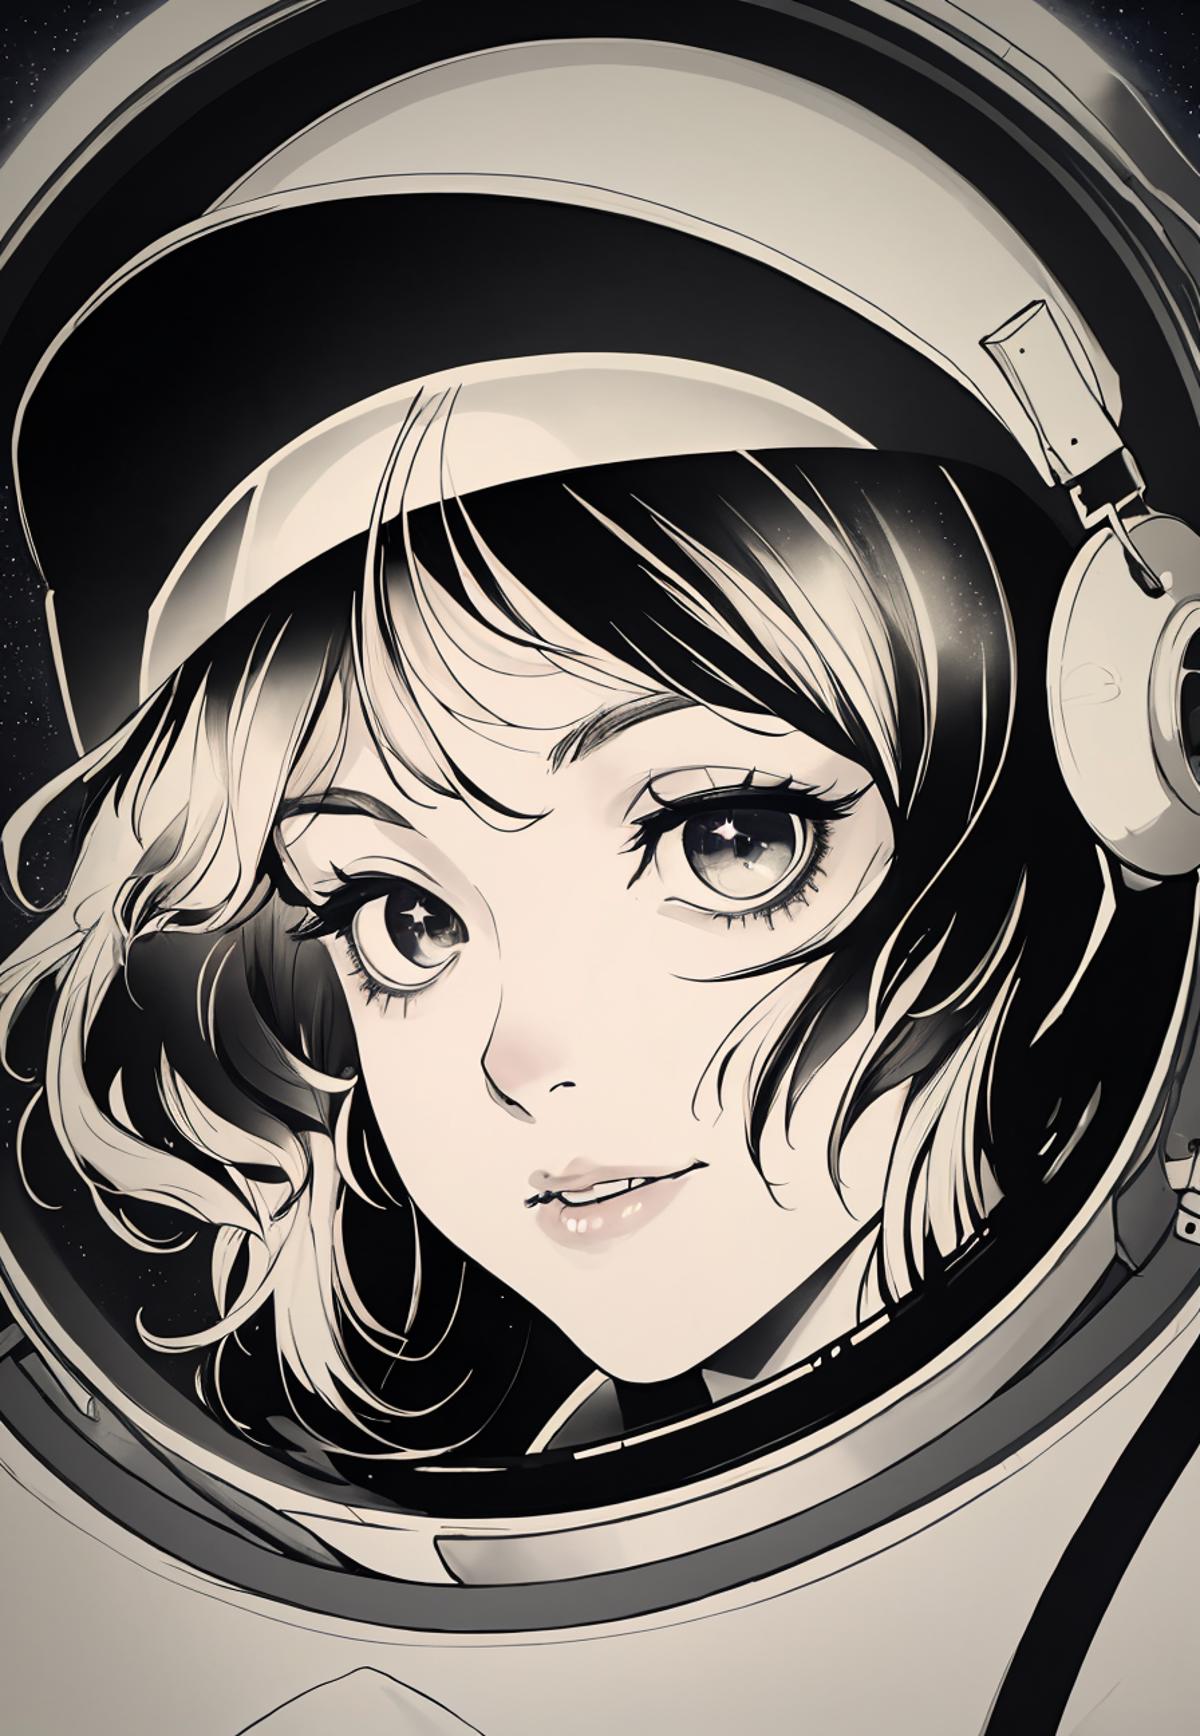 An Artistic Portrait of a Young Woman Wearing a Spacesuit and Headphones